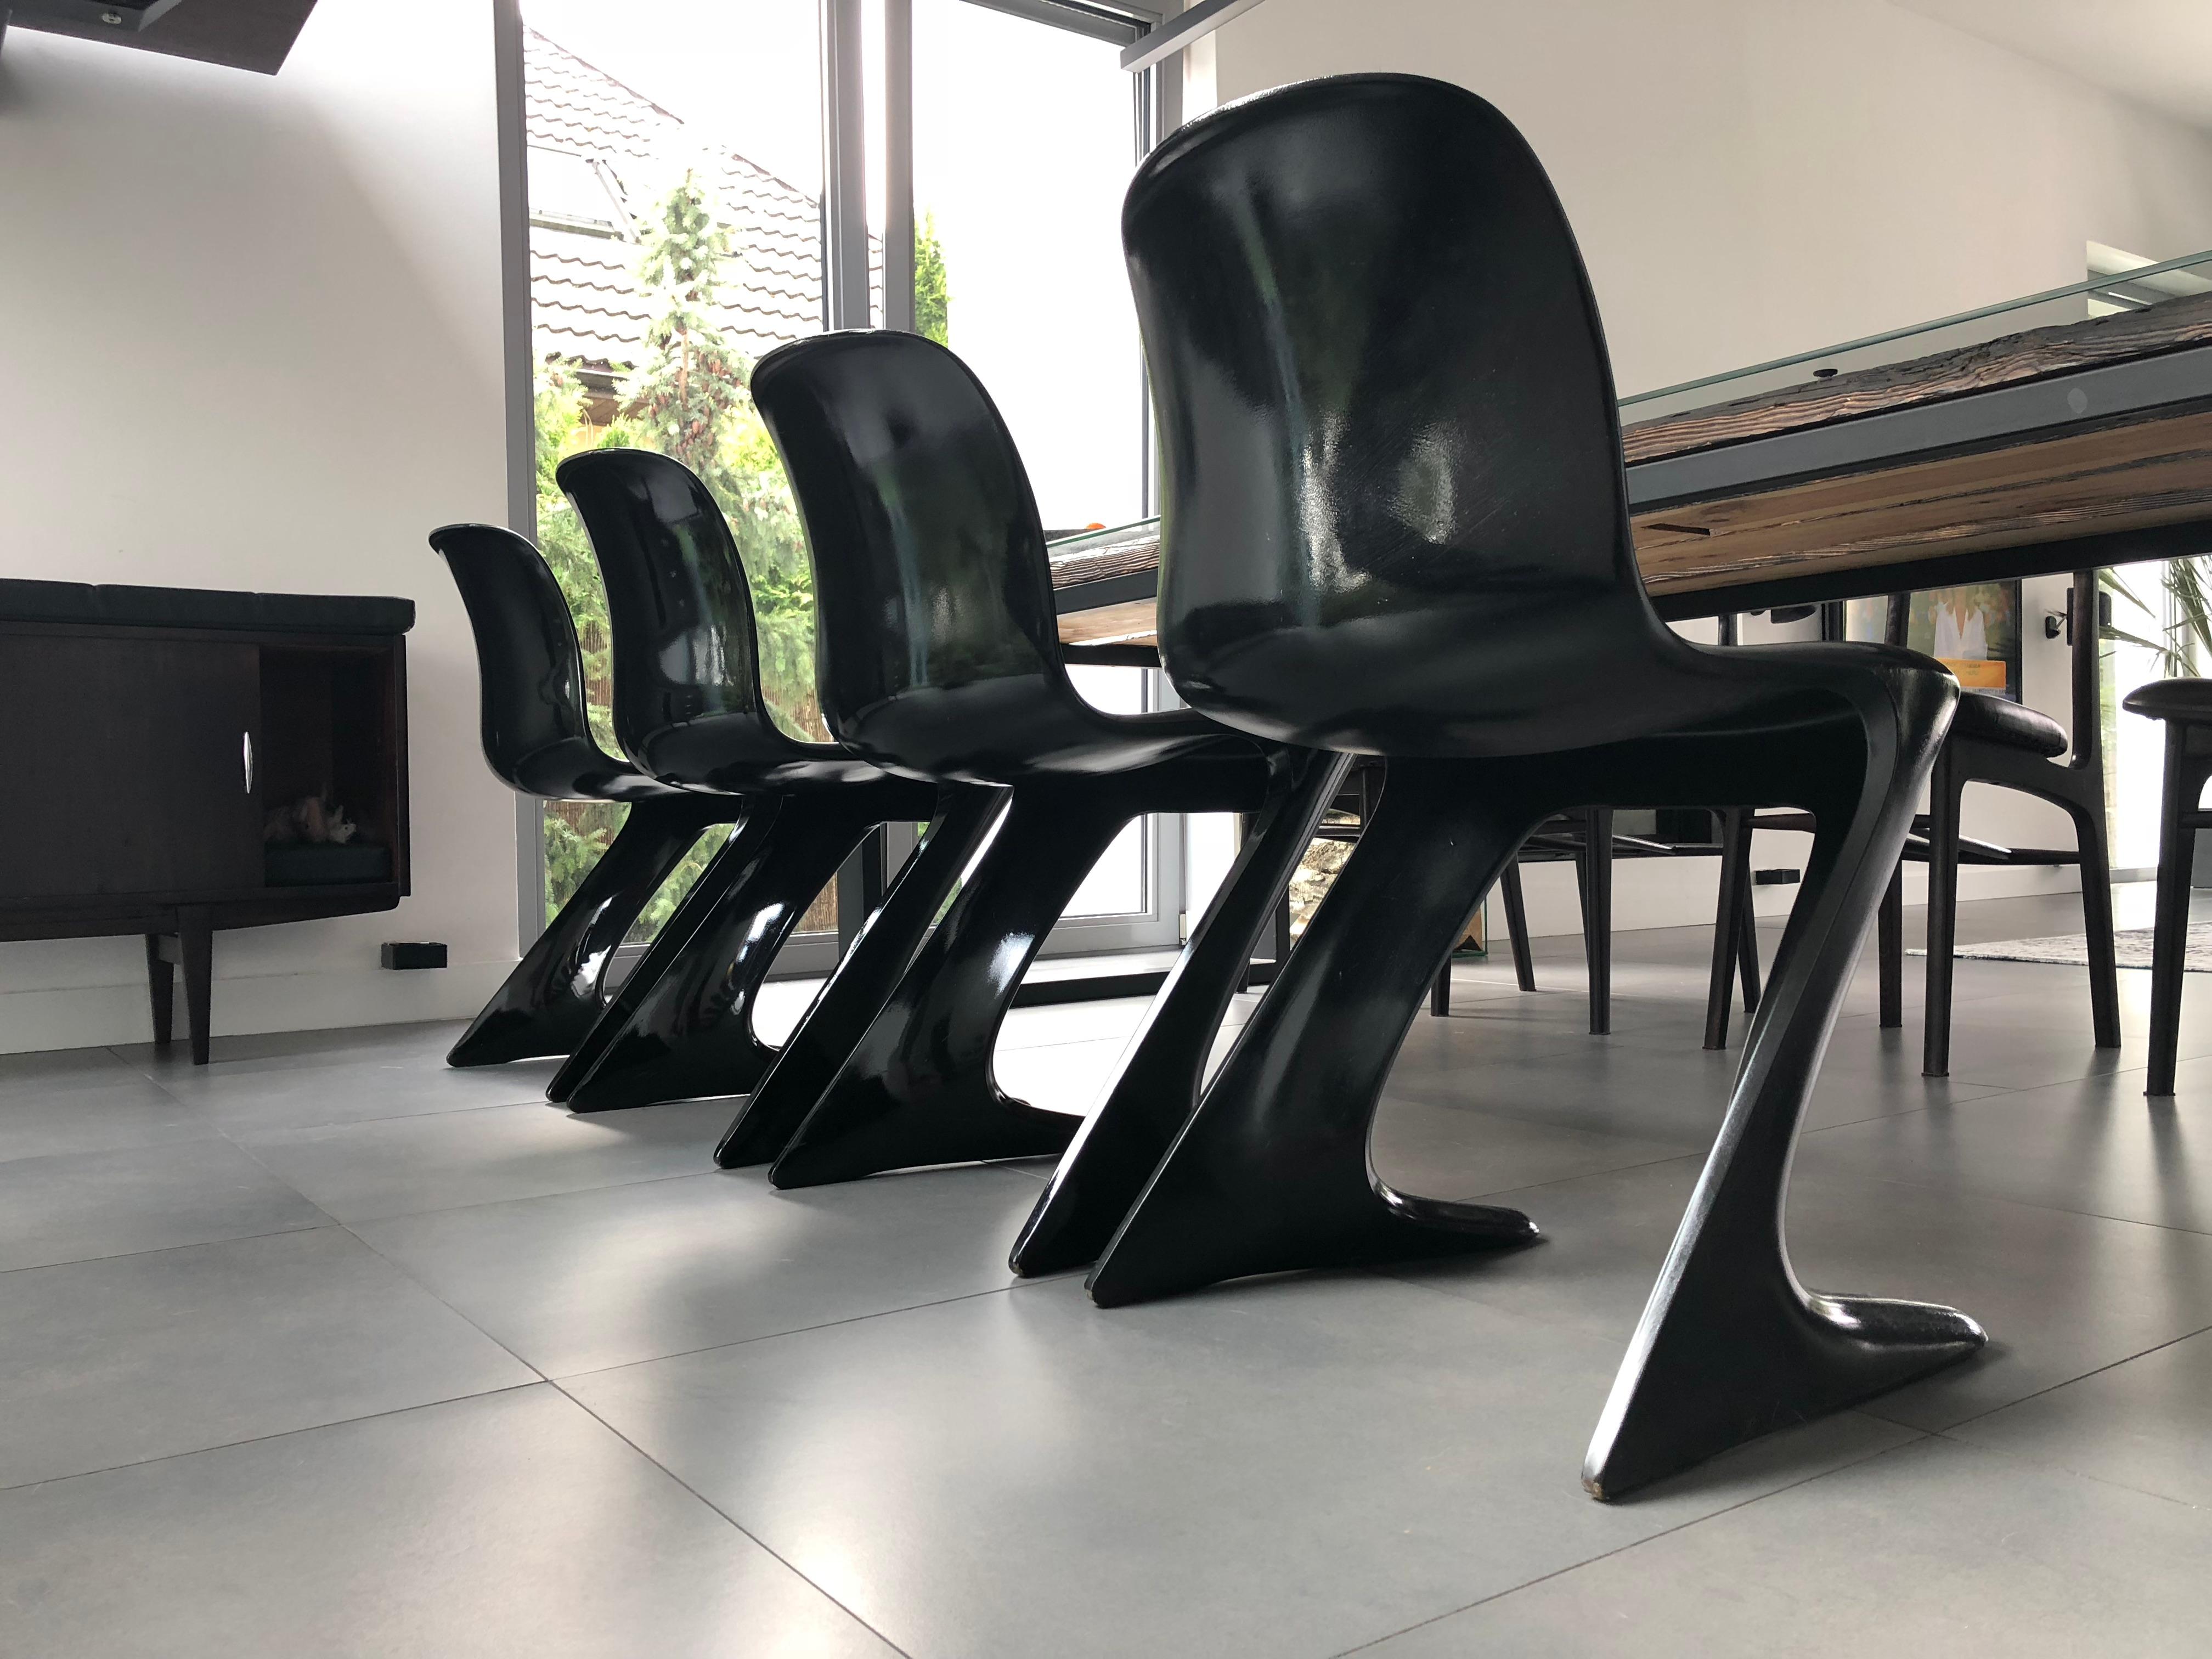 Fiberglass Set of Four Kangaroo Chairs Designed by Ernst Moeckl, Germany, 1968 For Sale